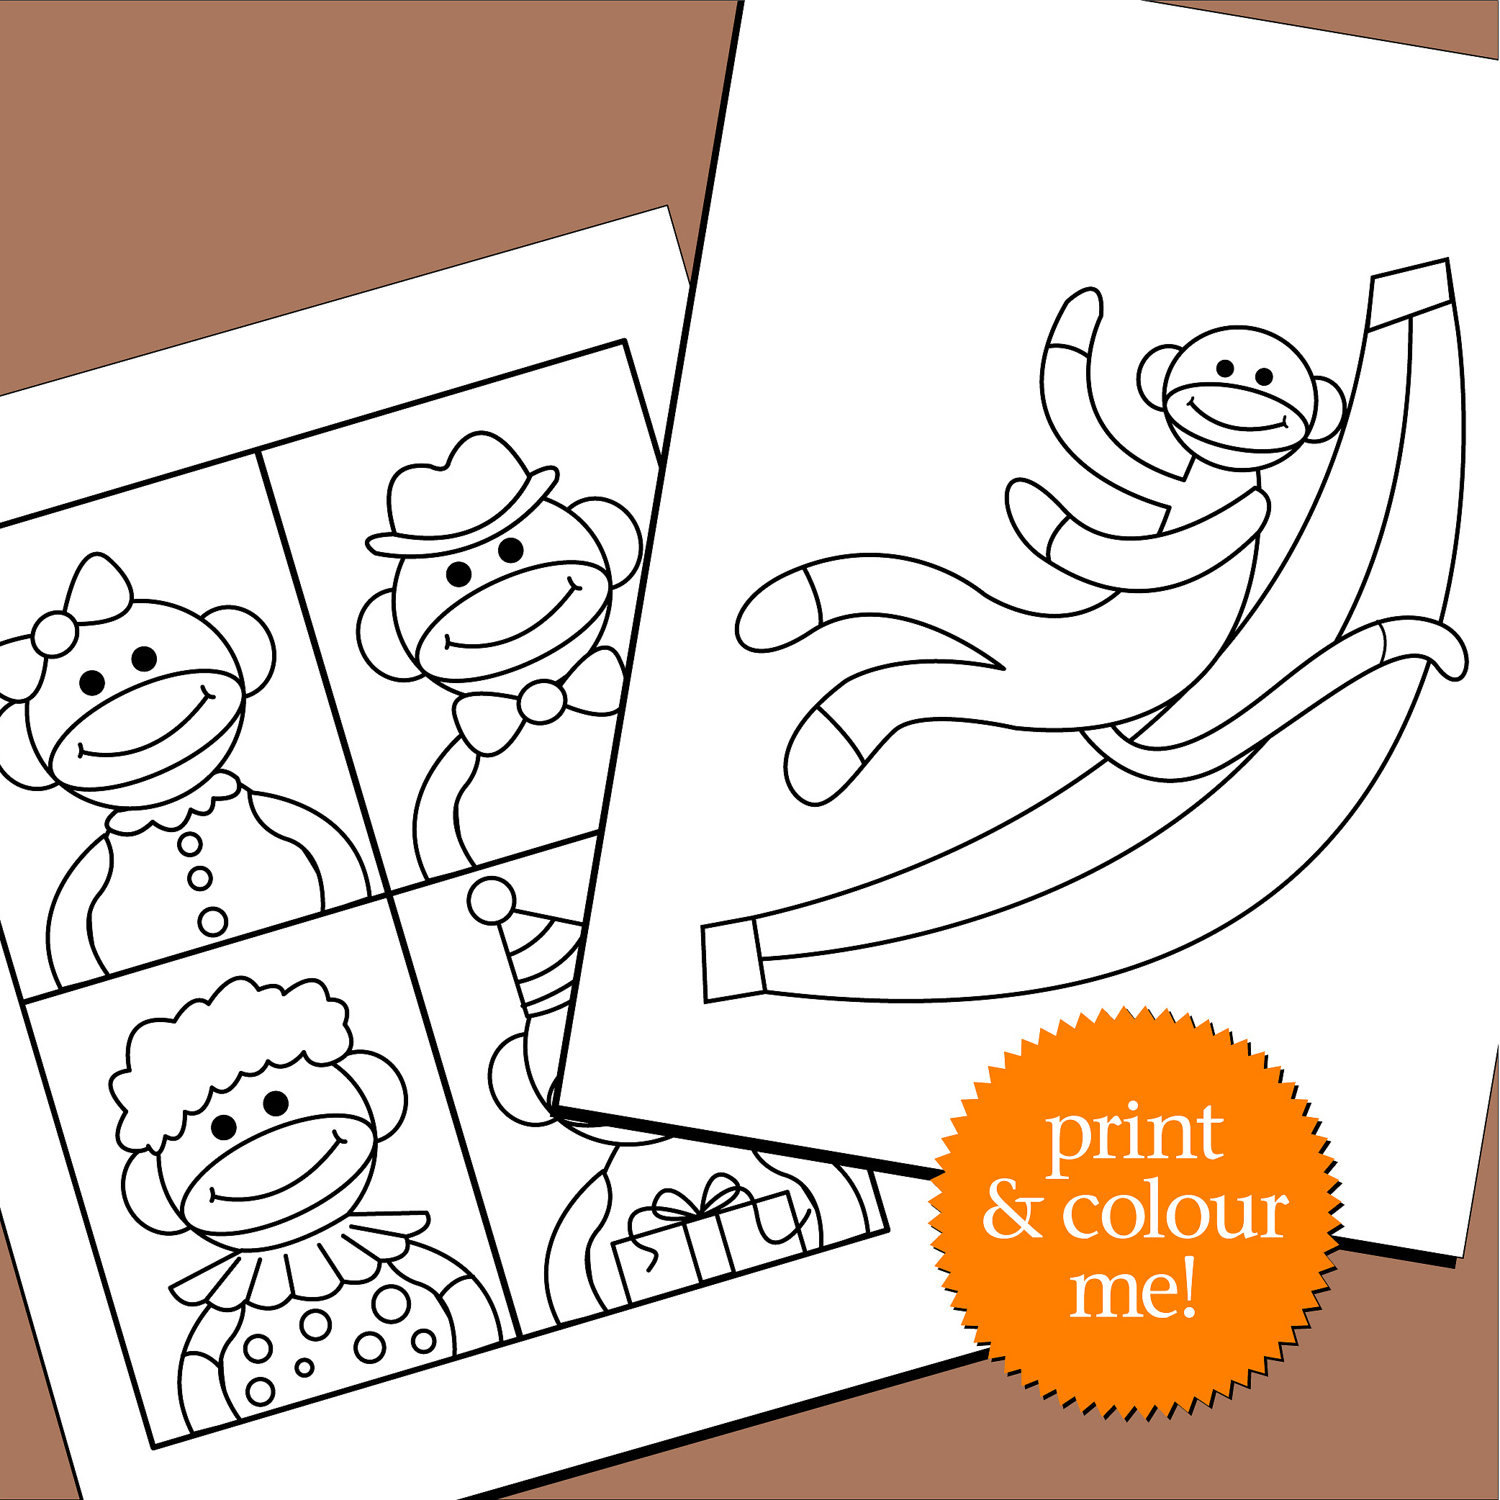 Colouring Book Sock Monkey Printable pdf by TriciaPiasecki on Etsy